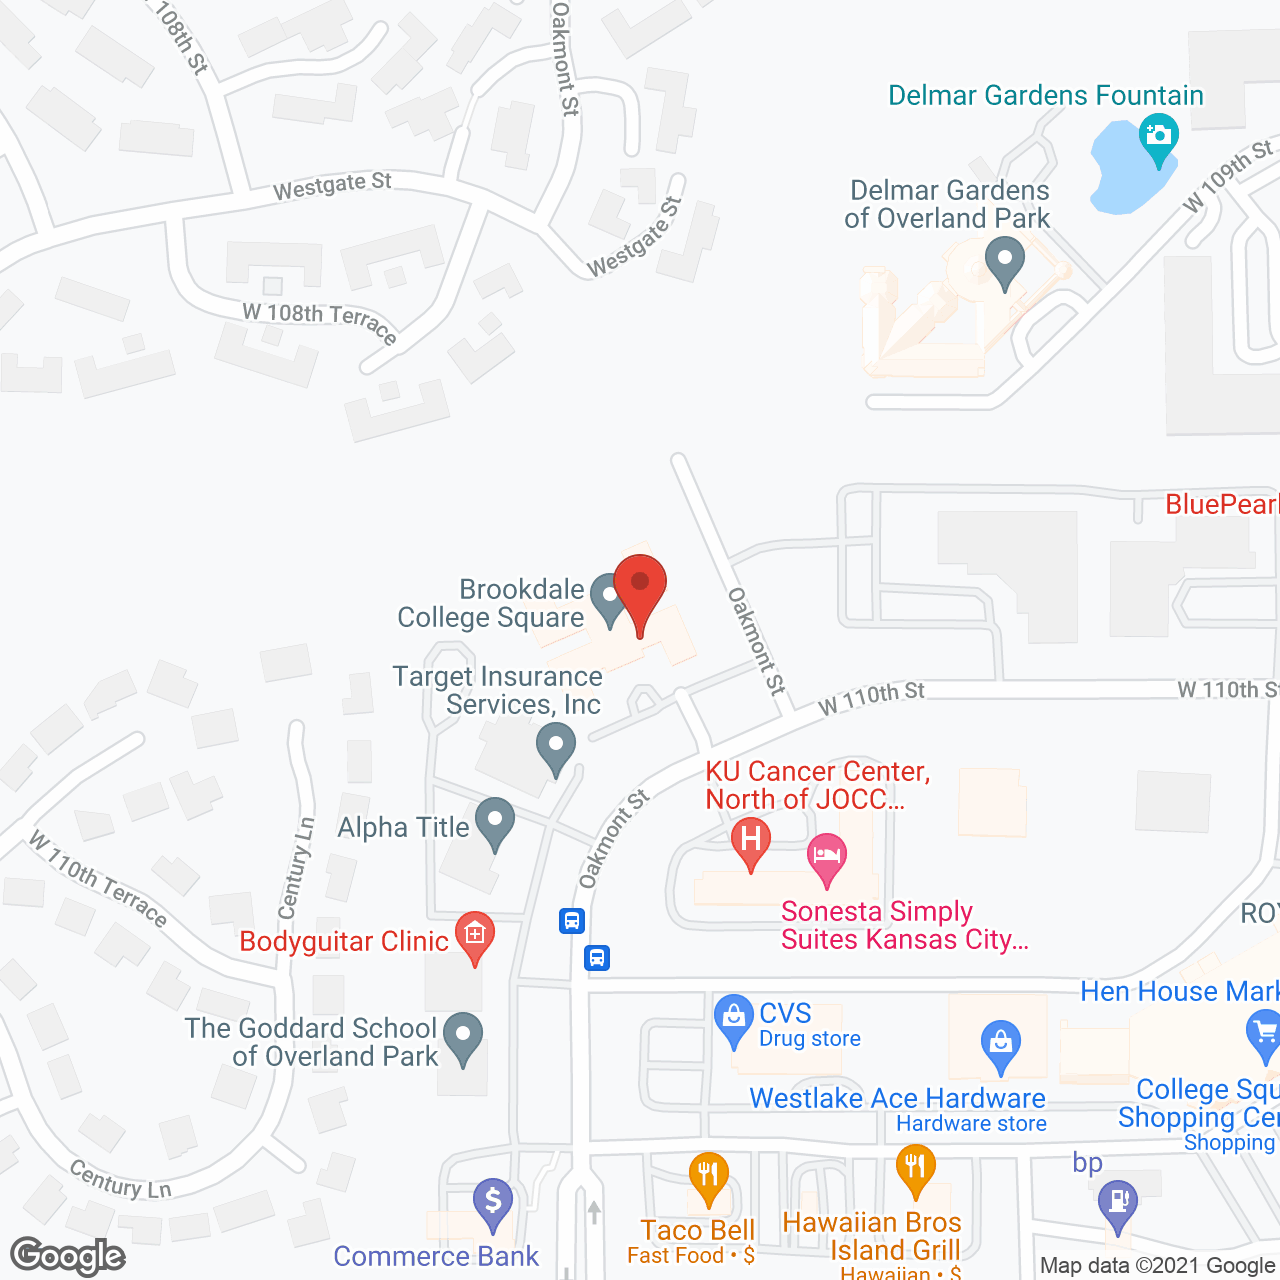 Brookdale College Square in google map